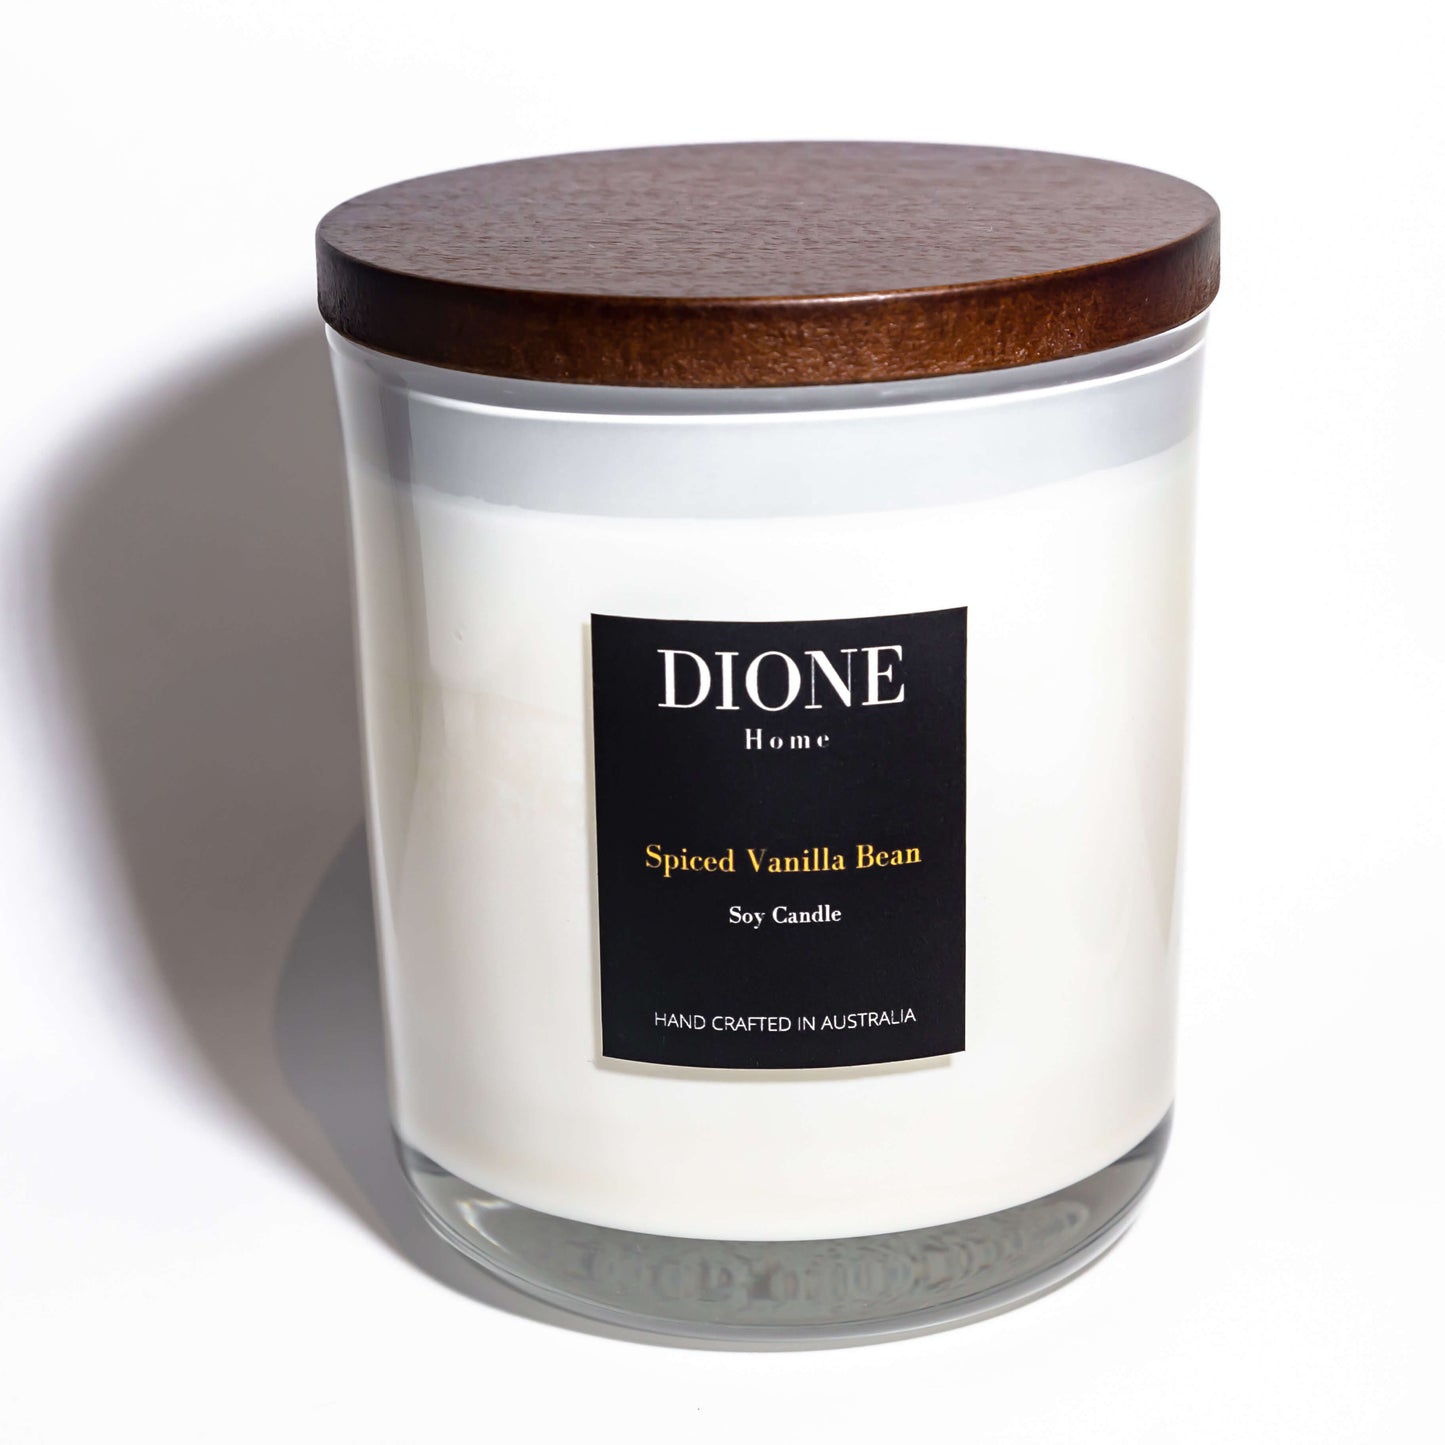 Spiced Vanilla Bean Soy Candle 400g